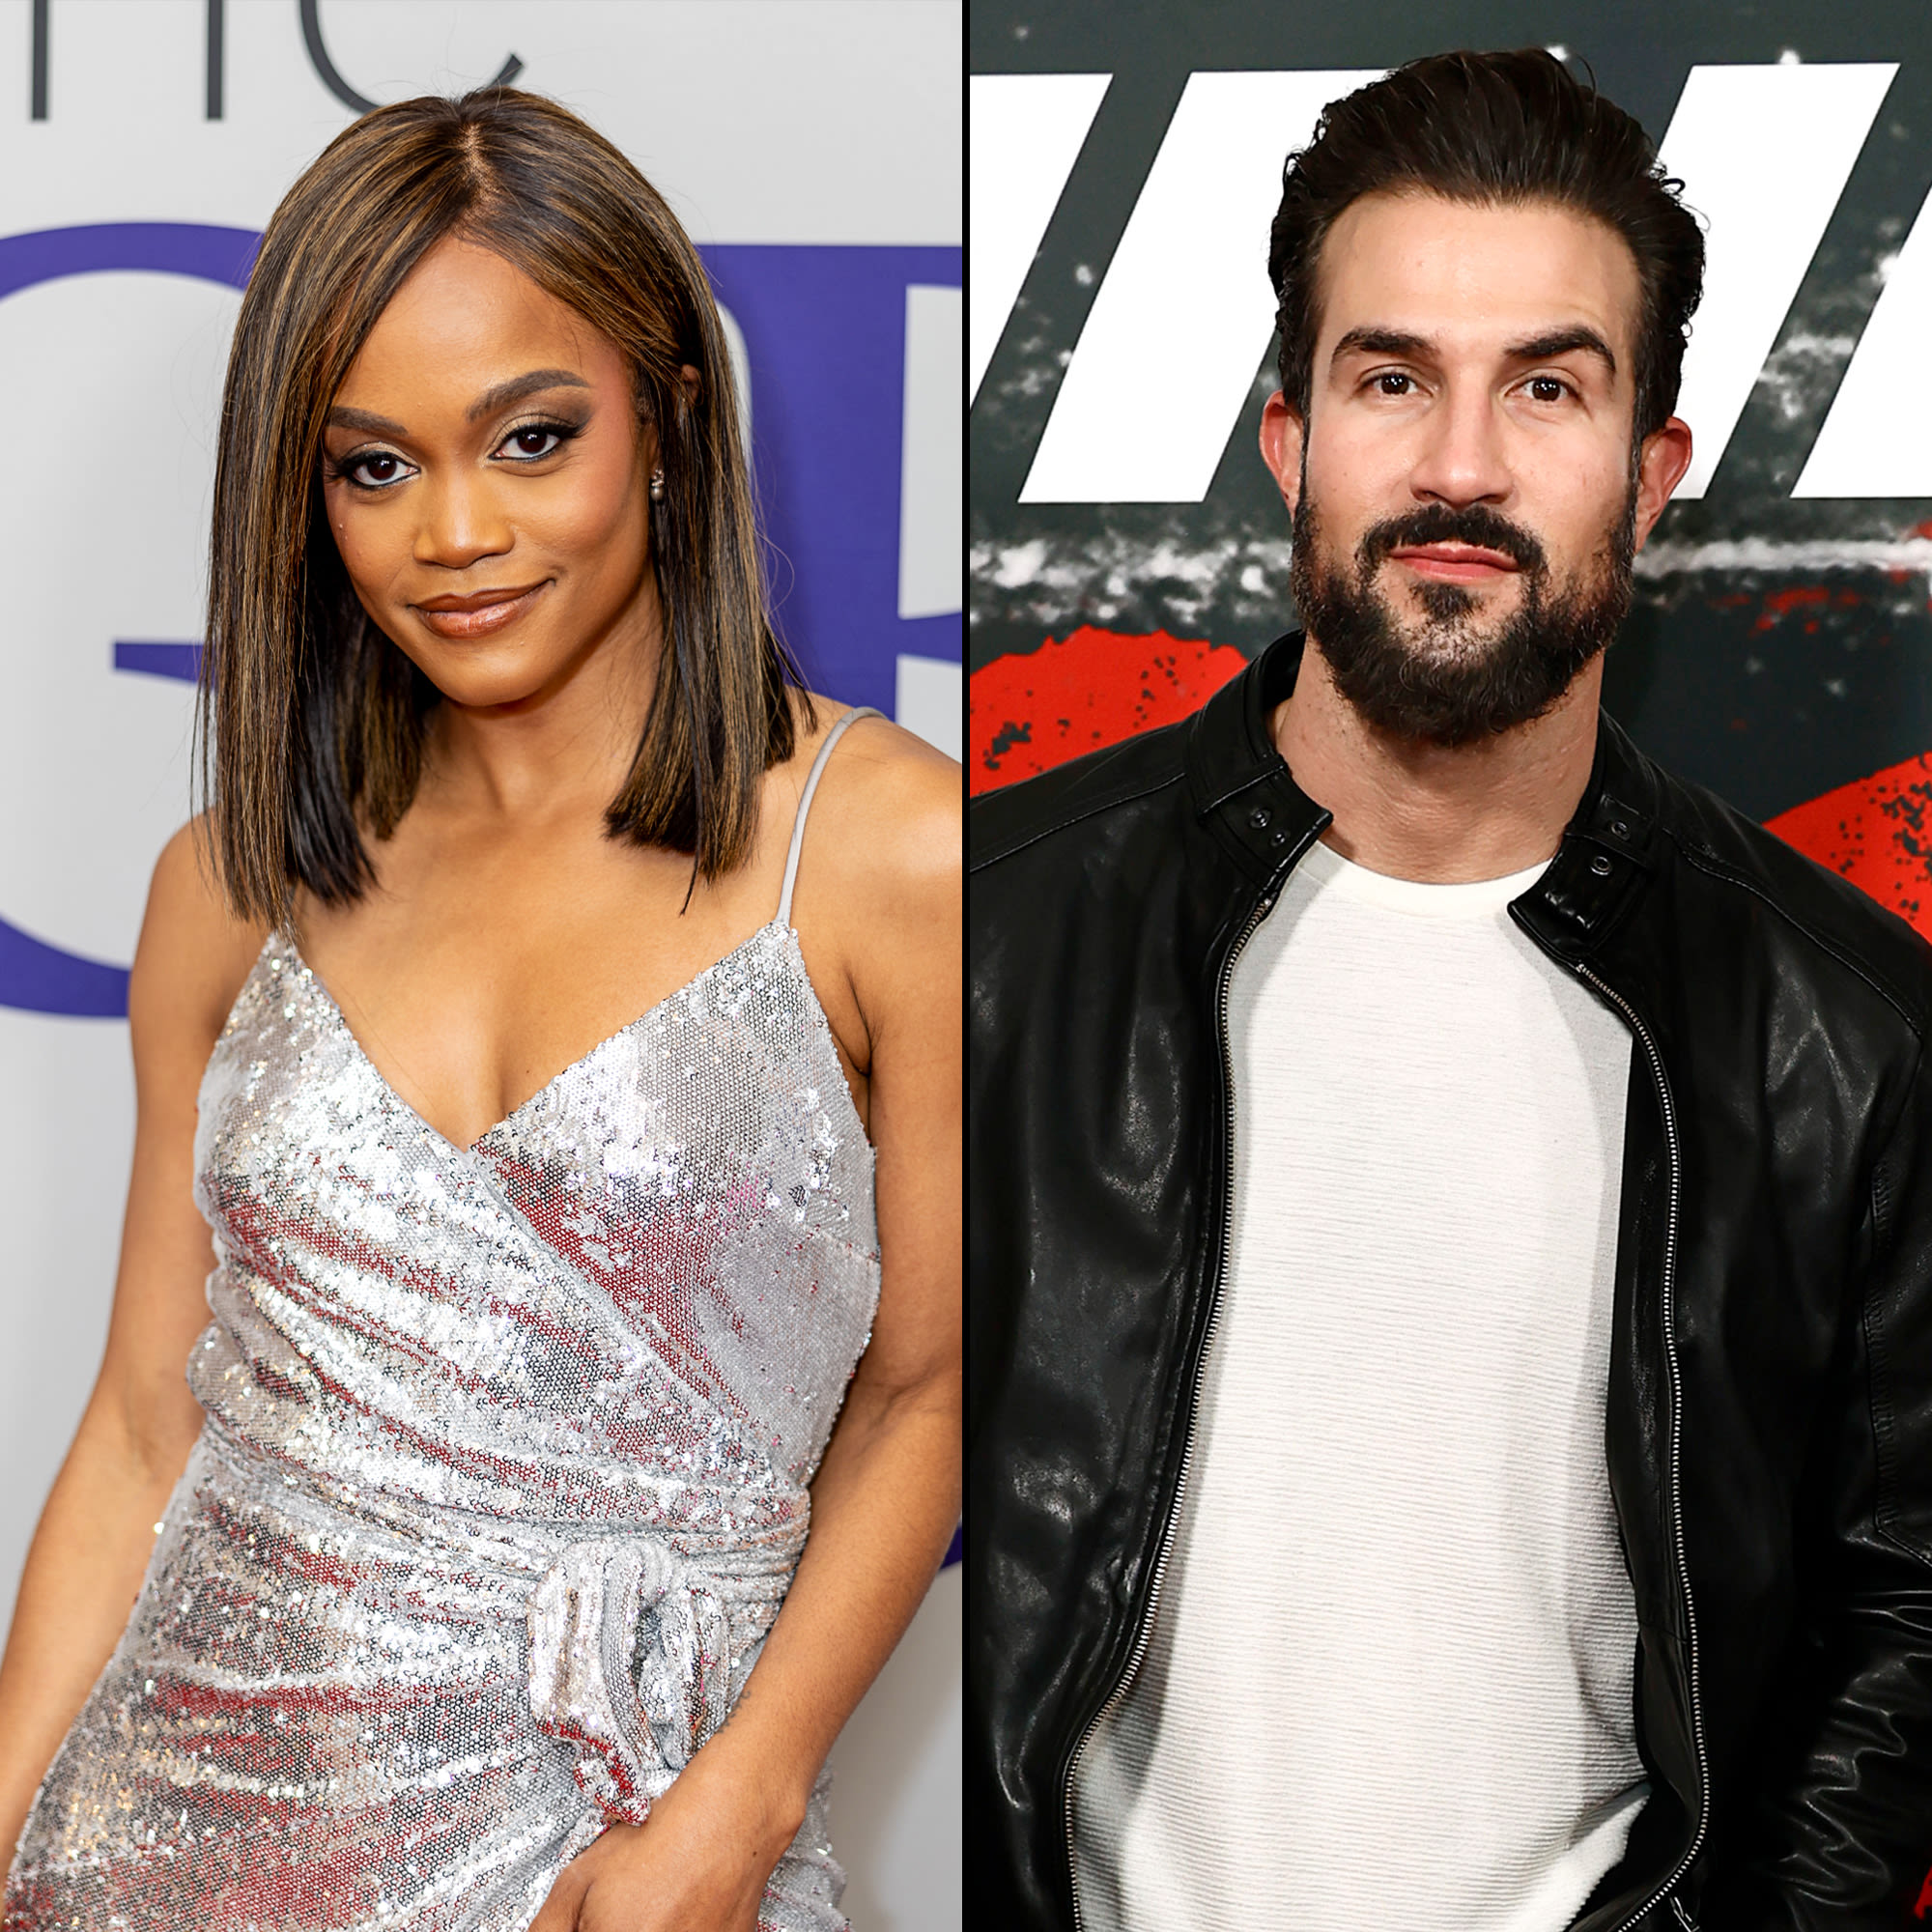 Rachel Lindsay Doesn’t Want to ‘Date for Potential,’ Needs ‘Ambitious’ Man After Bryan Abasolo Split